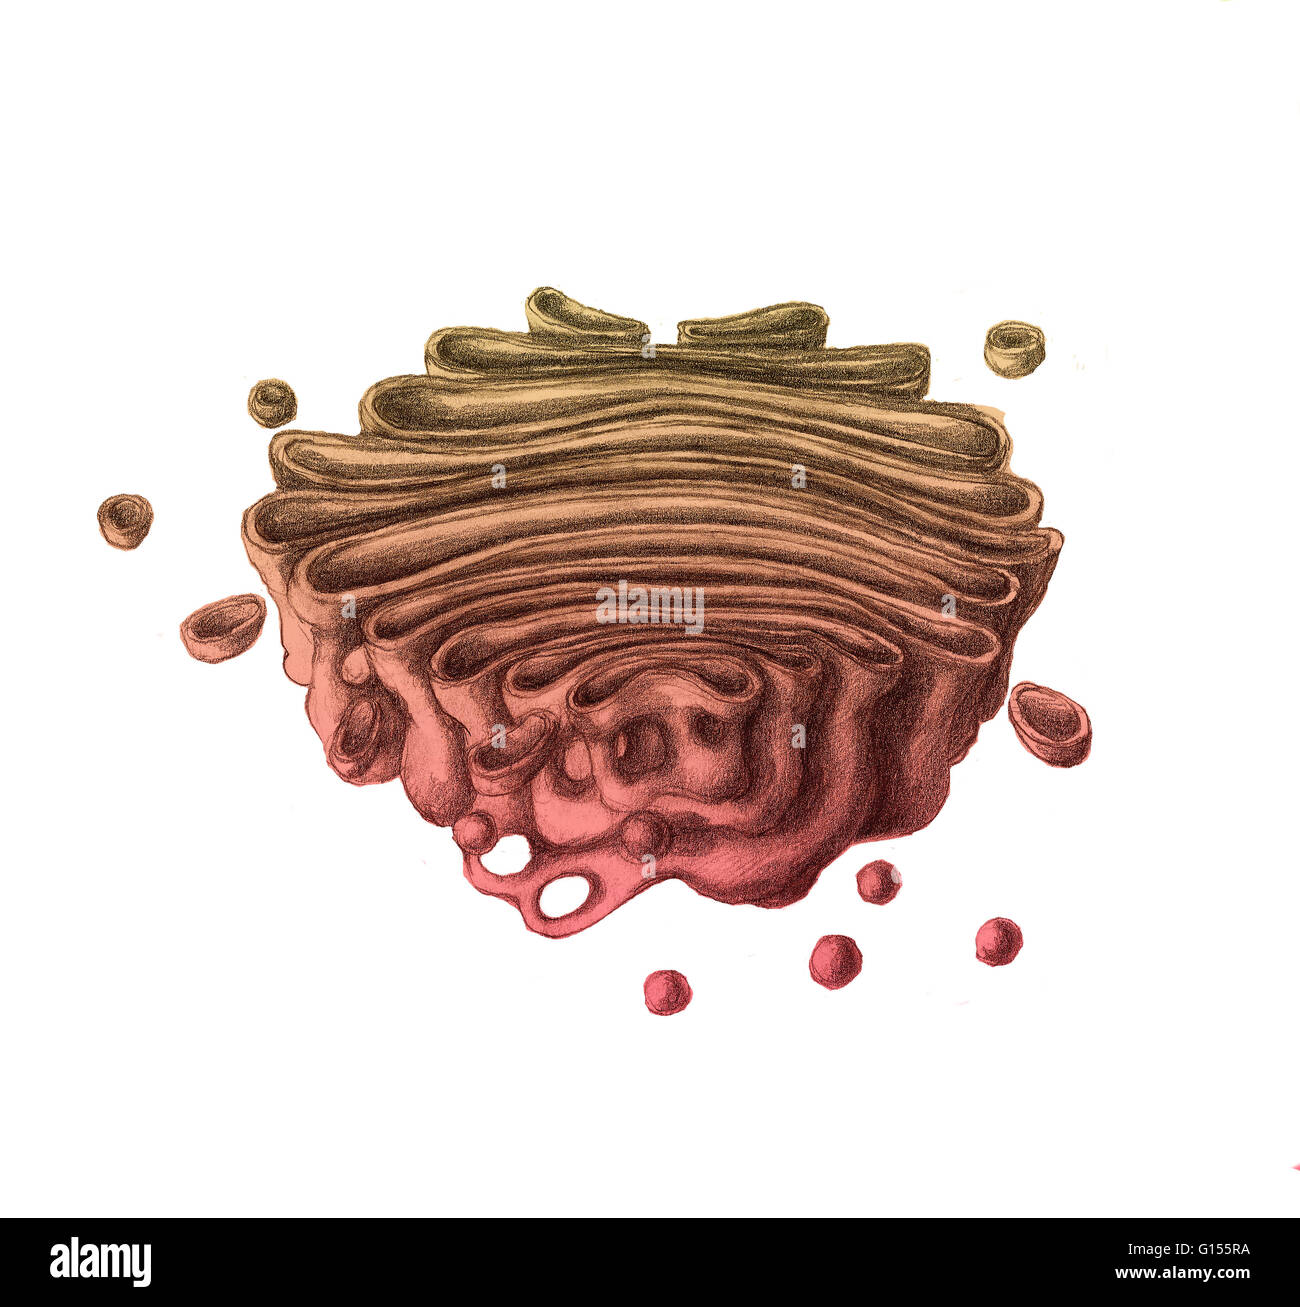 Illustration of a Golgi Apparatus, or Golgi Body or the Golgi Complex, an organelle found in most eukaryotic cells.  It is named after the Italian physician Camillo Golgi who identified it in 1897.  It processes and packages proteins and lipids before the Stock Photo